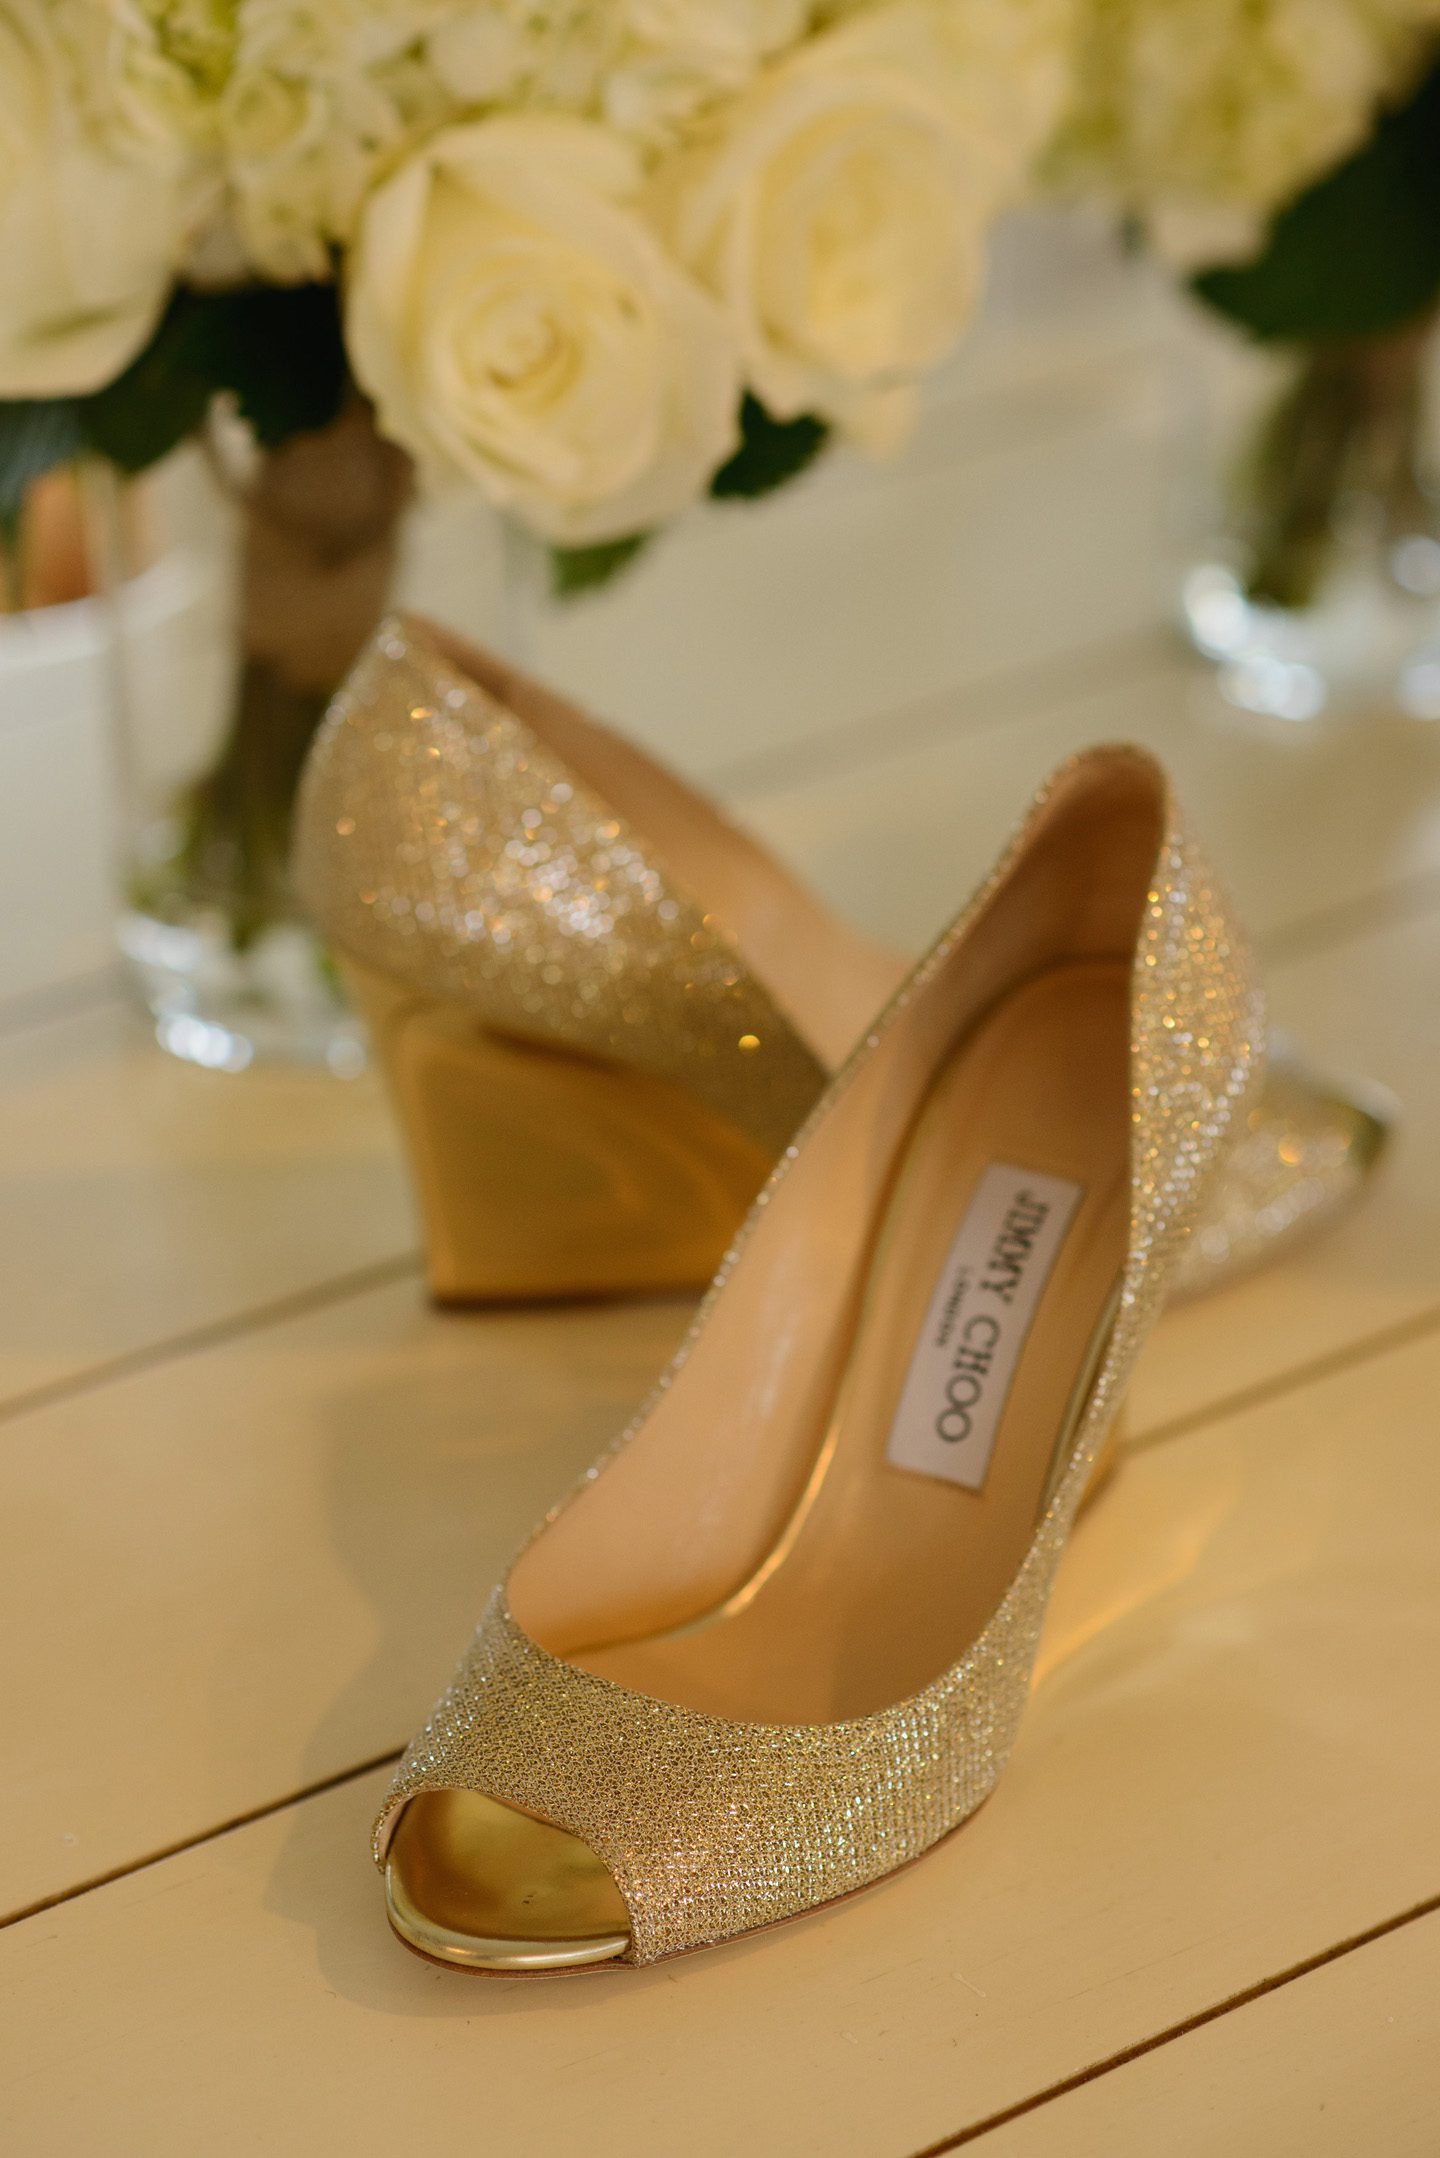 Sanderling Resort Outer Banks Wedding by Neil GT Photography Shoes